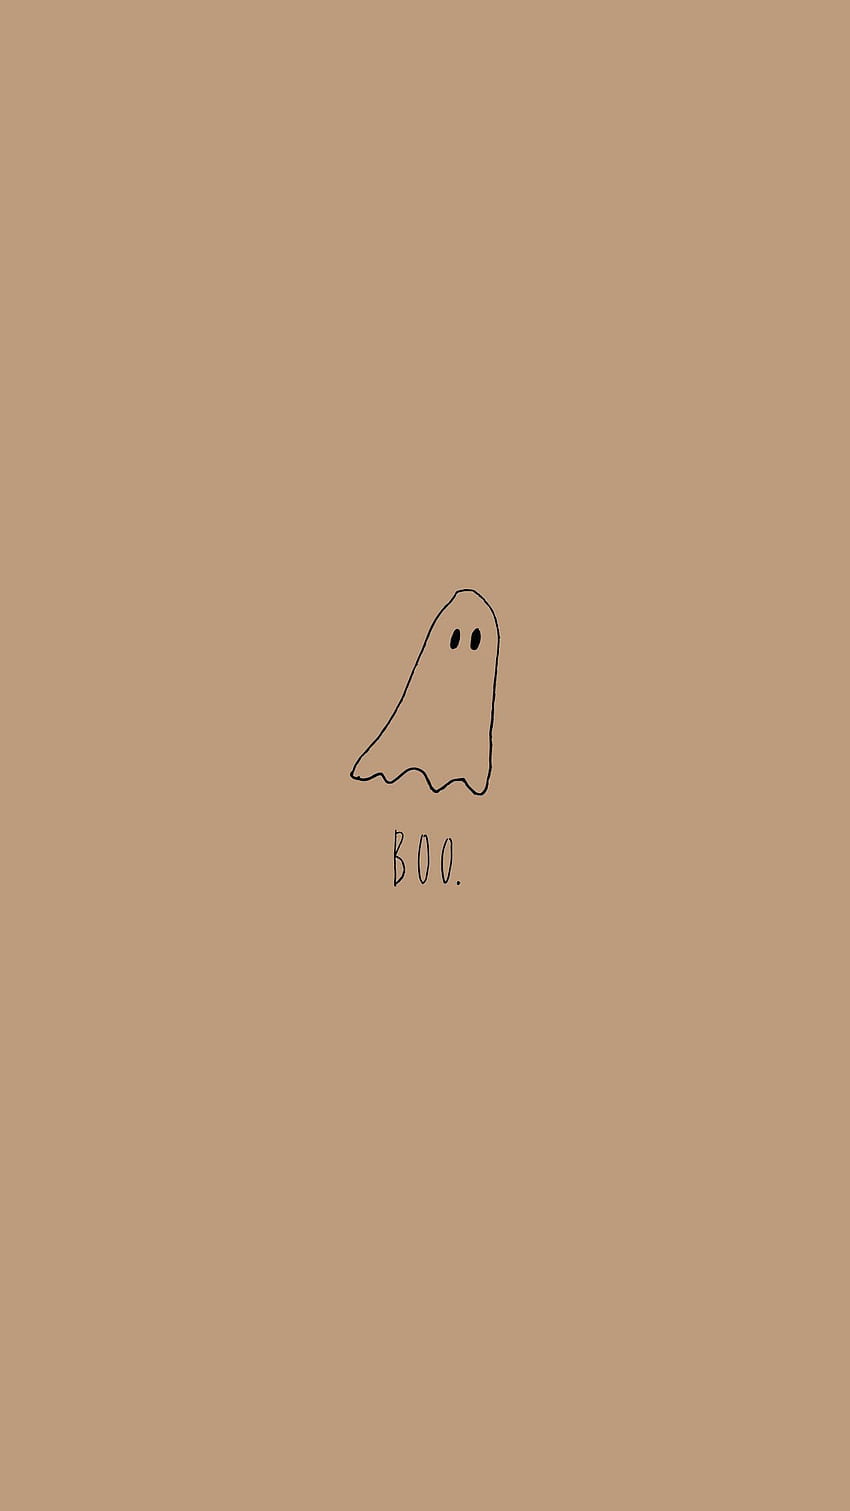 Minimalist phone background with a ghost and the word 